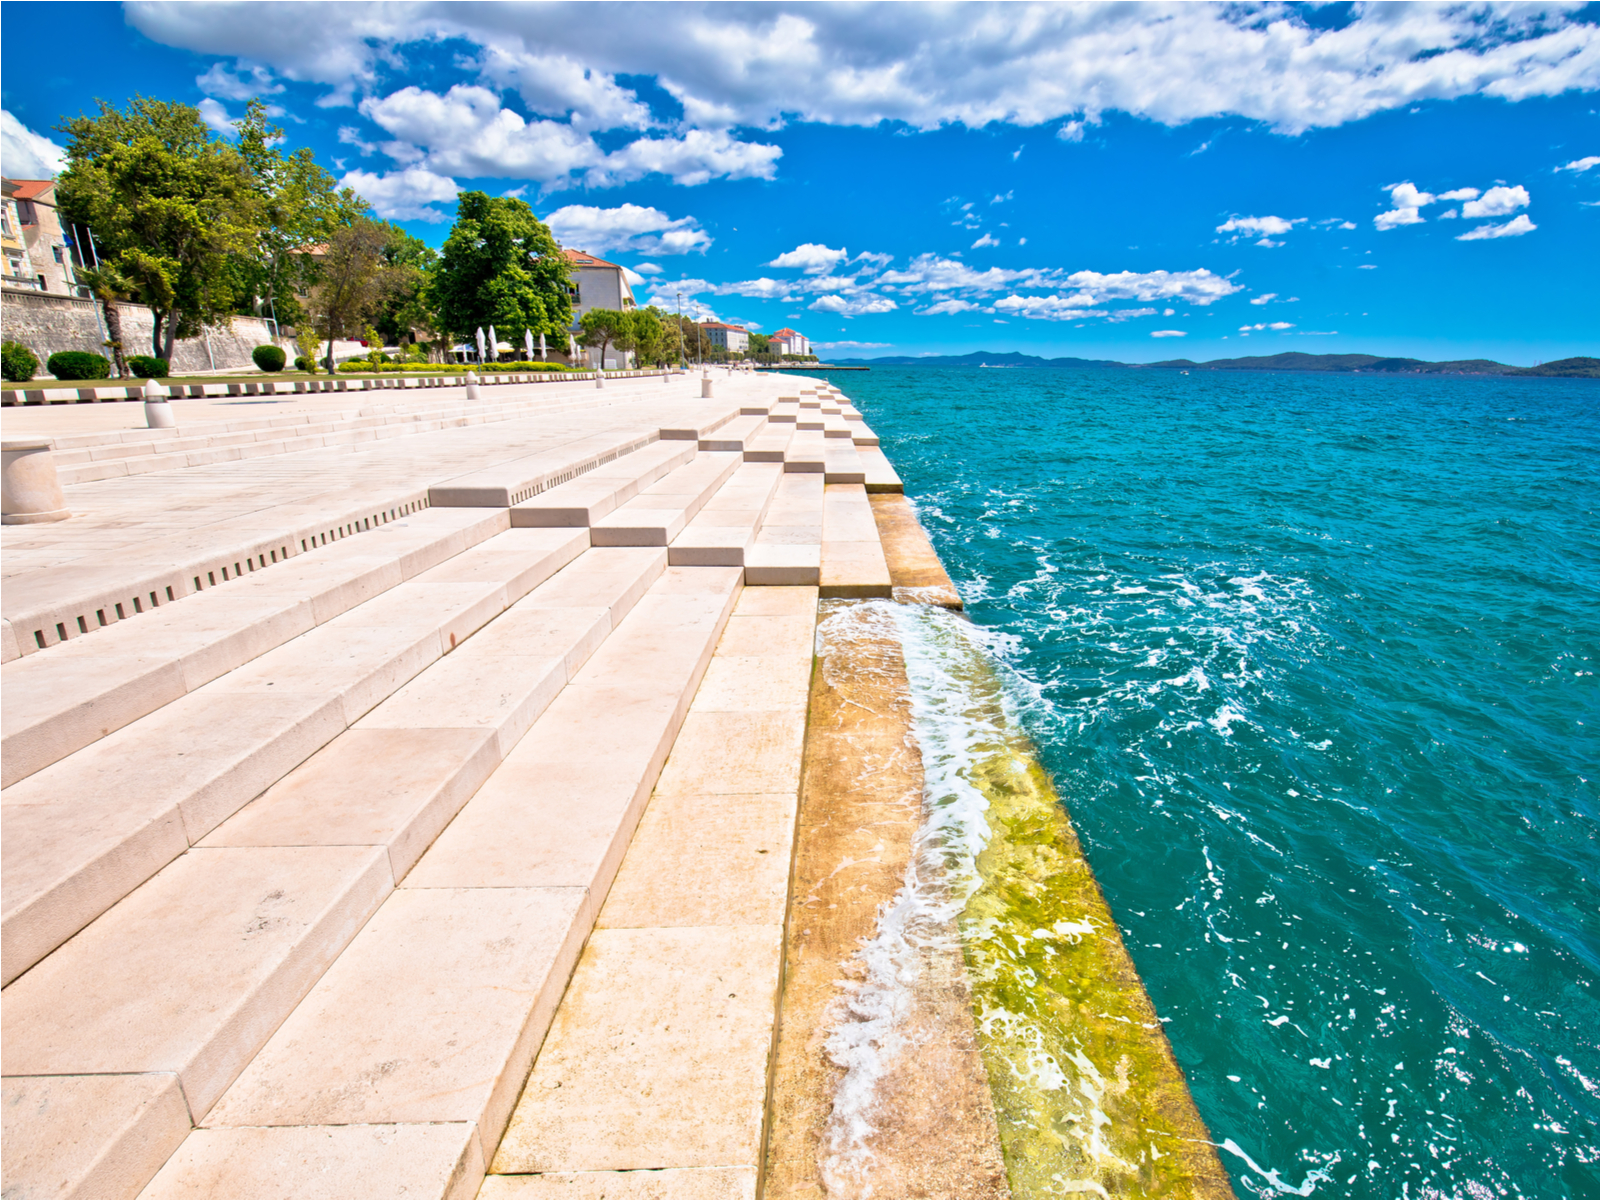 Zadar's Sea Organ, one of the coolest things to do in Croatia